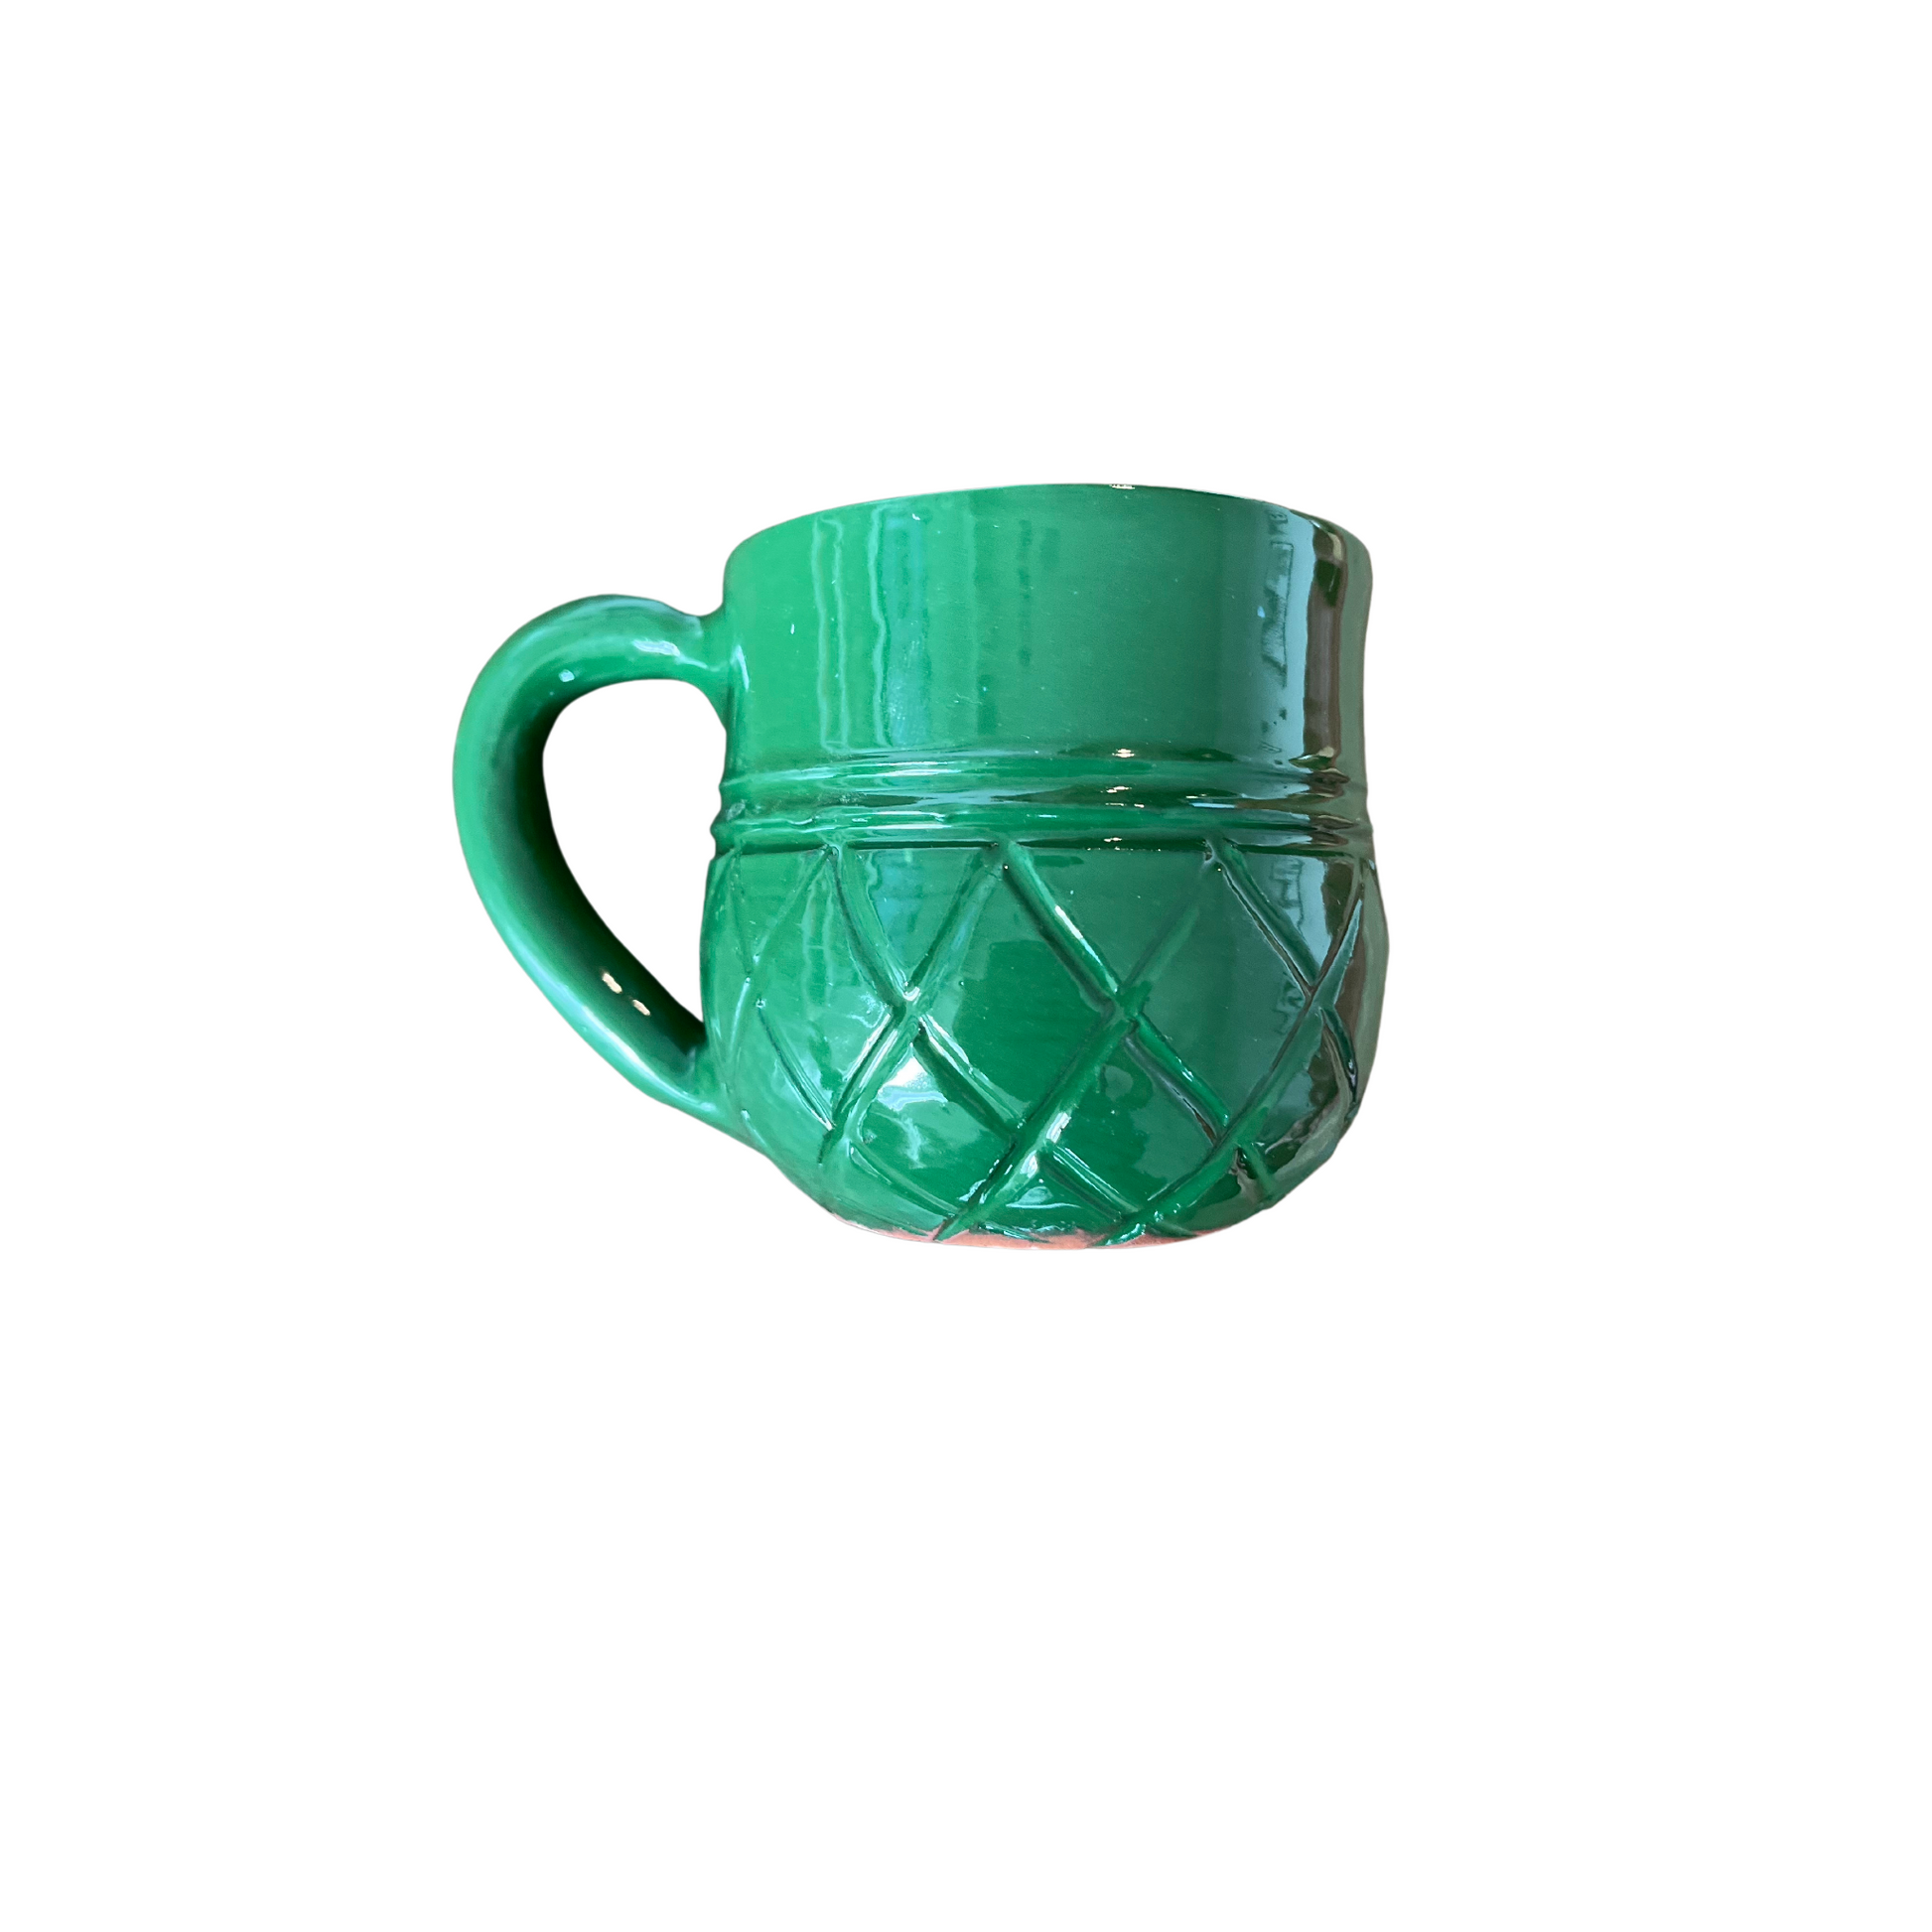 Handcrafted 6 ounce Ananas Mug in Green. It has a checkered pattern scored into the lower half making each much unique.